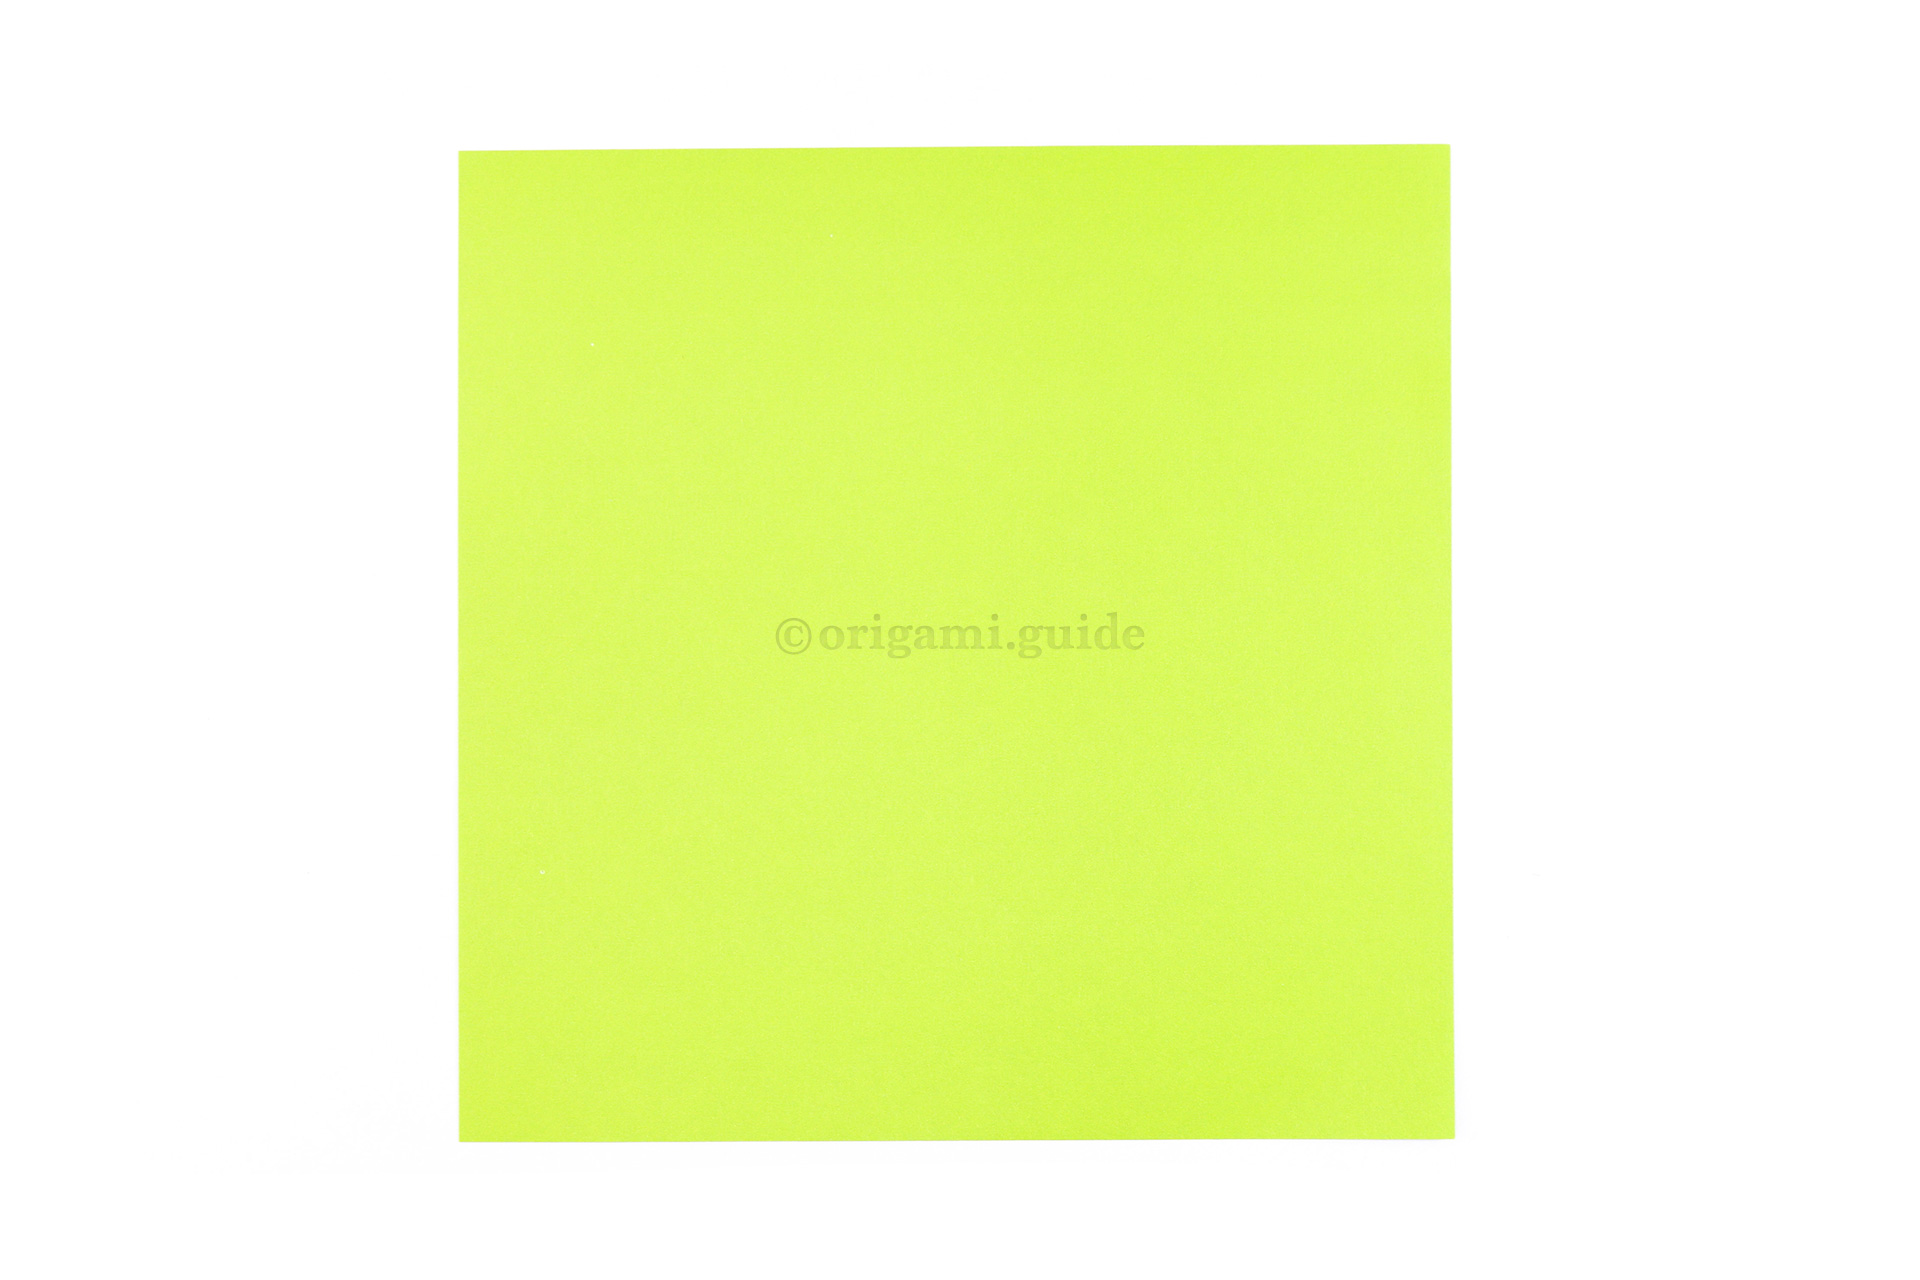 This is the front of our origami paper, our origami turtle will end up this color.